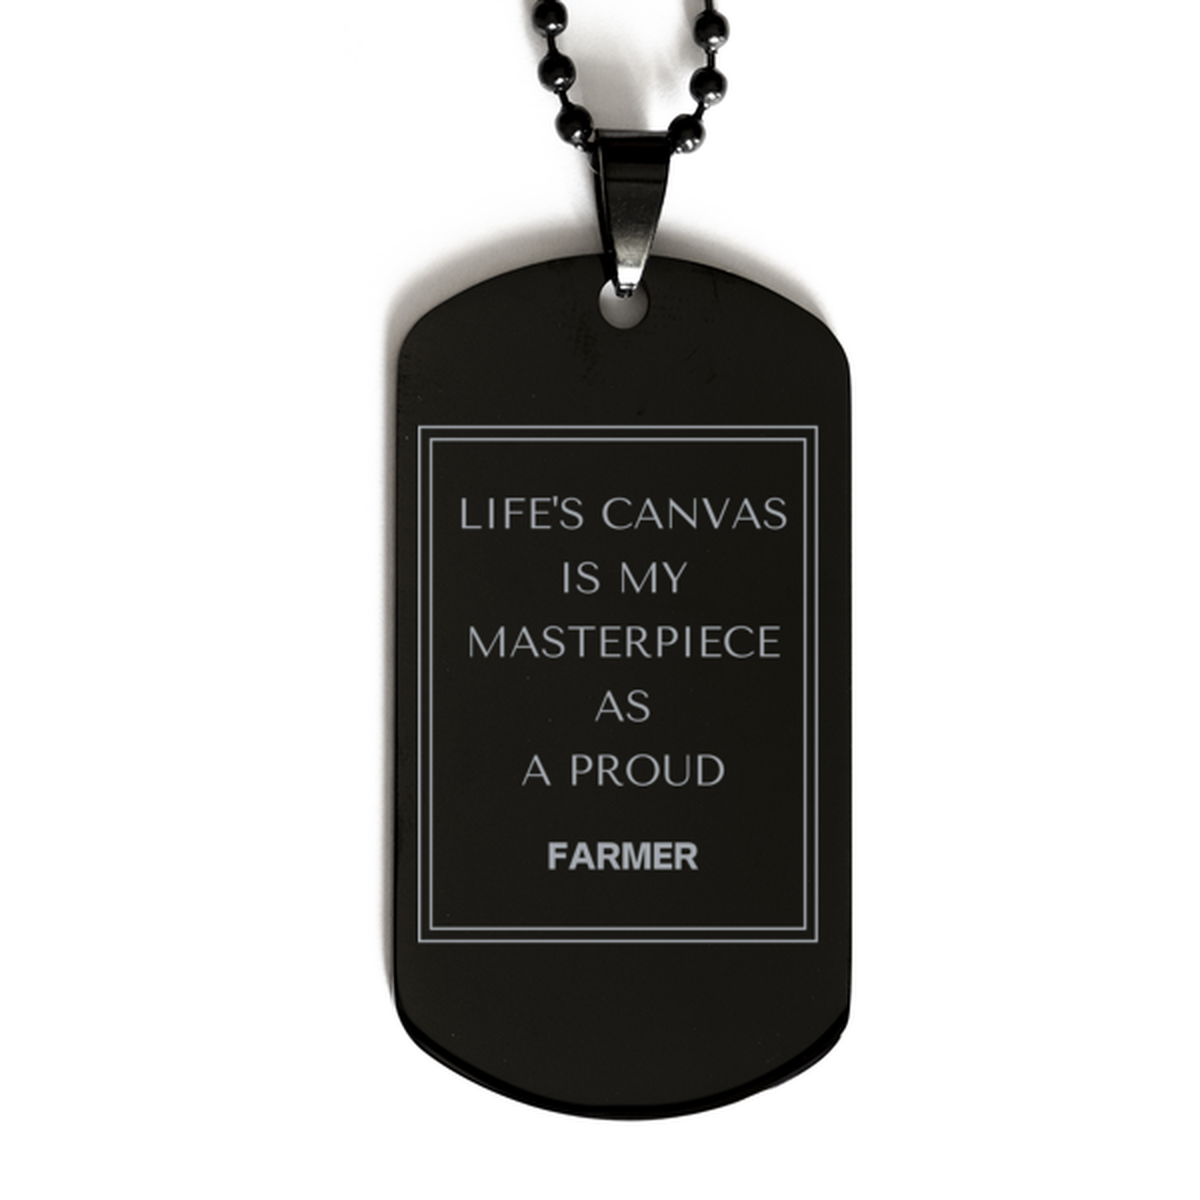 Proud Farmer Gifts, Life's canvas is my masterpiece, Epic Birthday Christmas Unique Black Dog Tag For Farmer, Coworkers, Men, Women, Friends